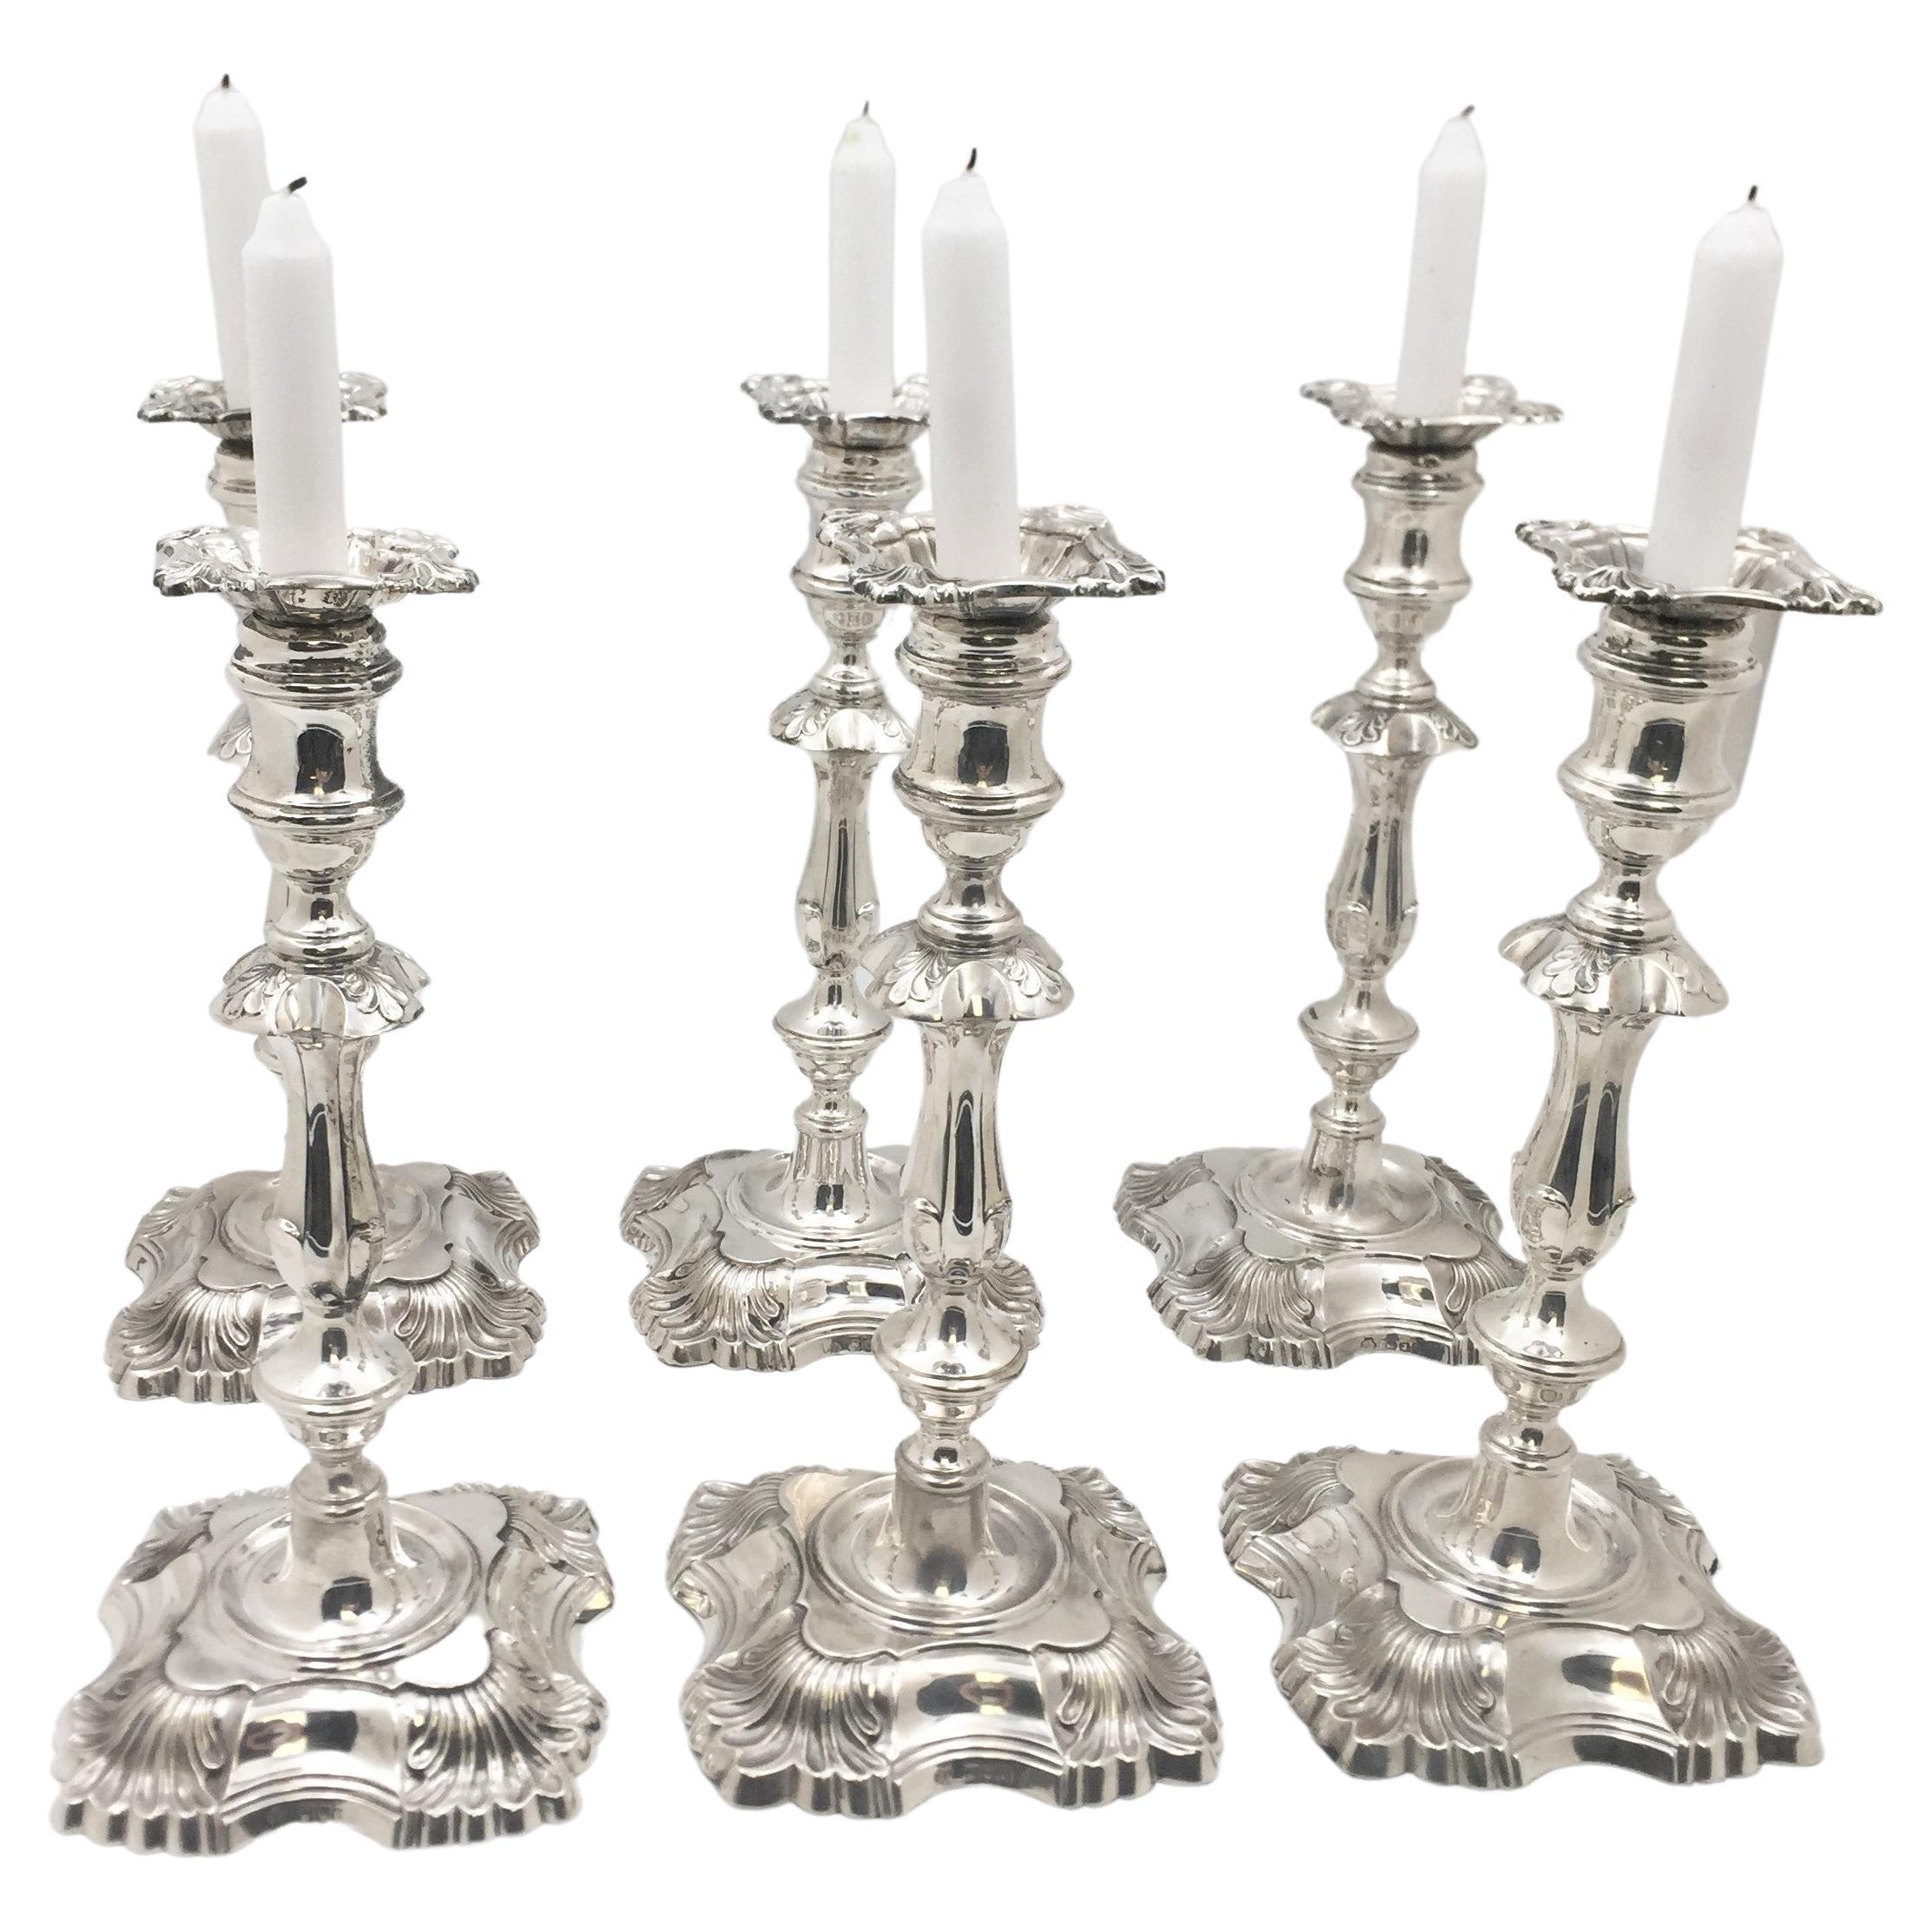 Hutton Set of 6 Sterling Silver Candlesticks in Georgian Style